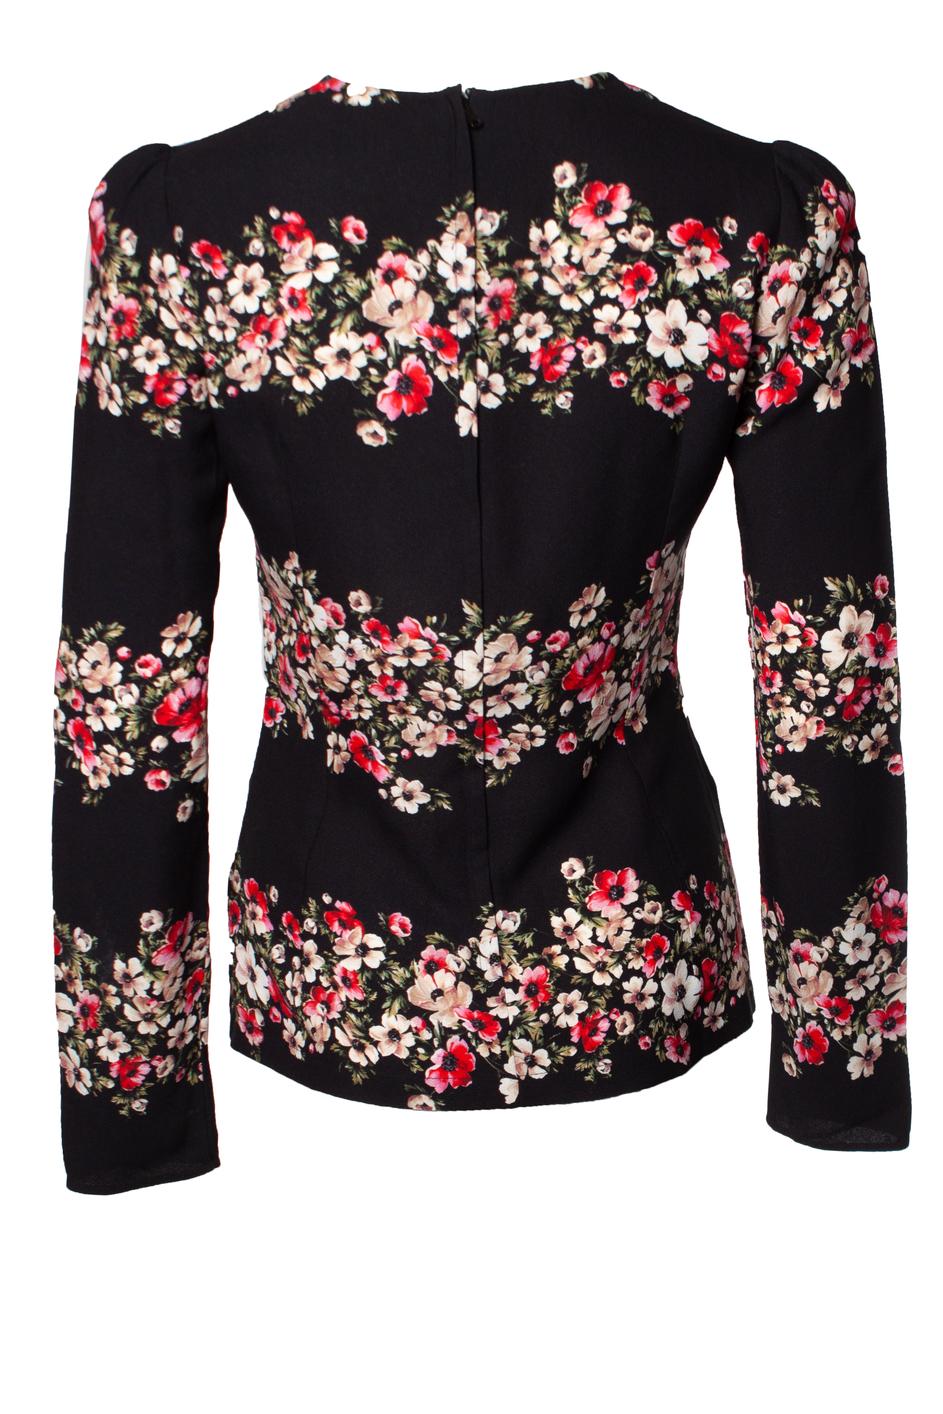 Dolce & Gabbana, Black top with floral print In Excellent Condition For Sale In AMSTERDAM, NL